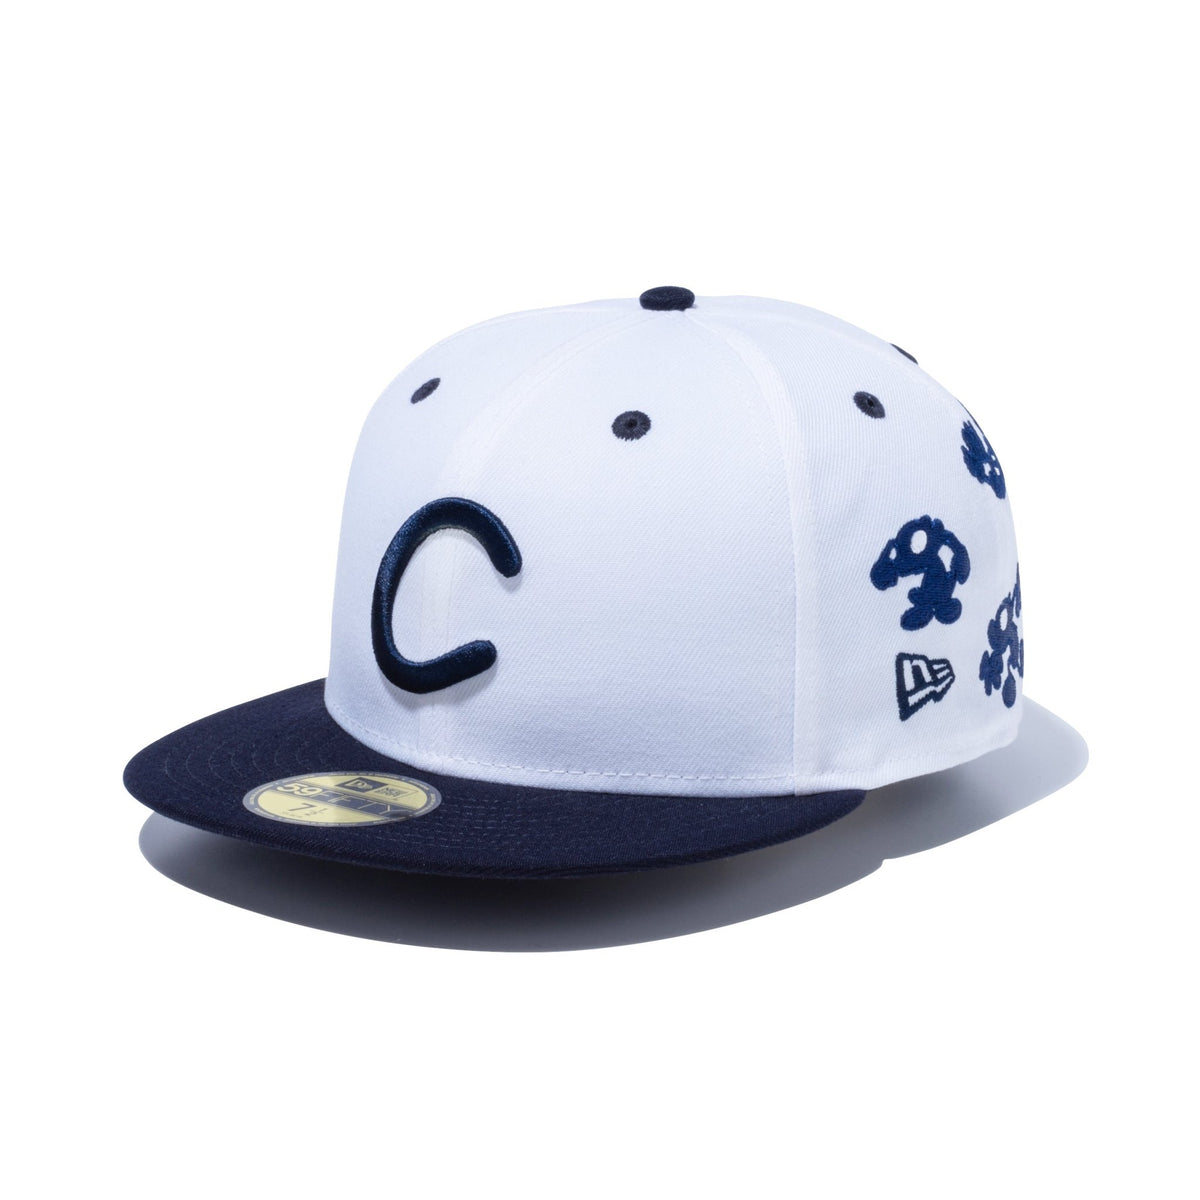 59FIFTY COIN PARKING DELIVERY Cロゴ ホワイト ネイビーバイザー